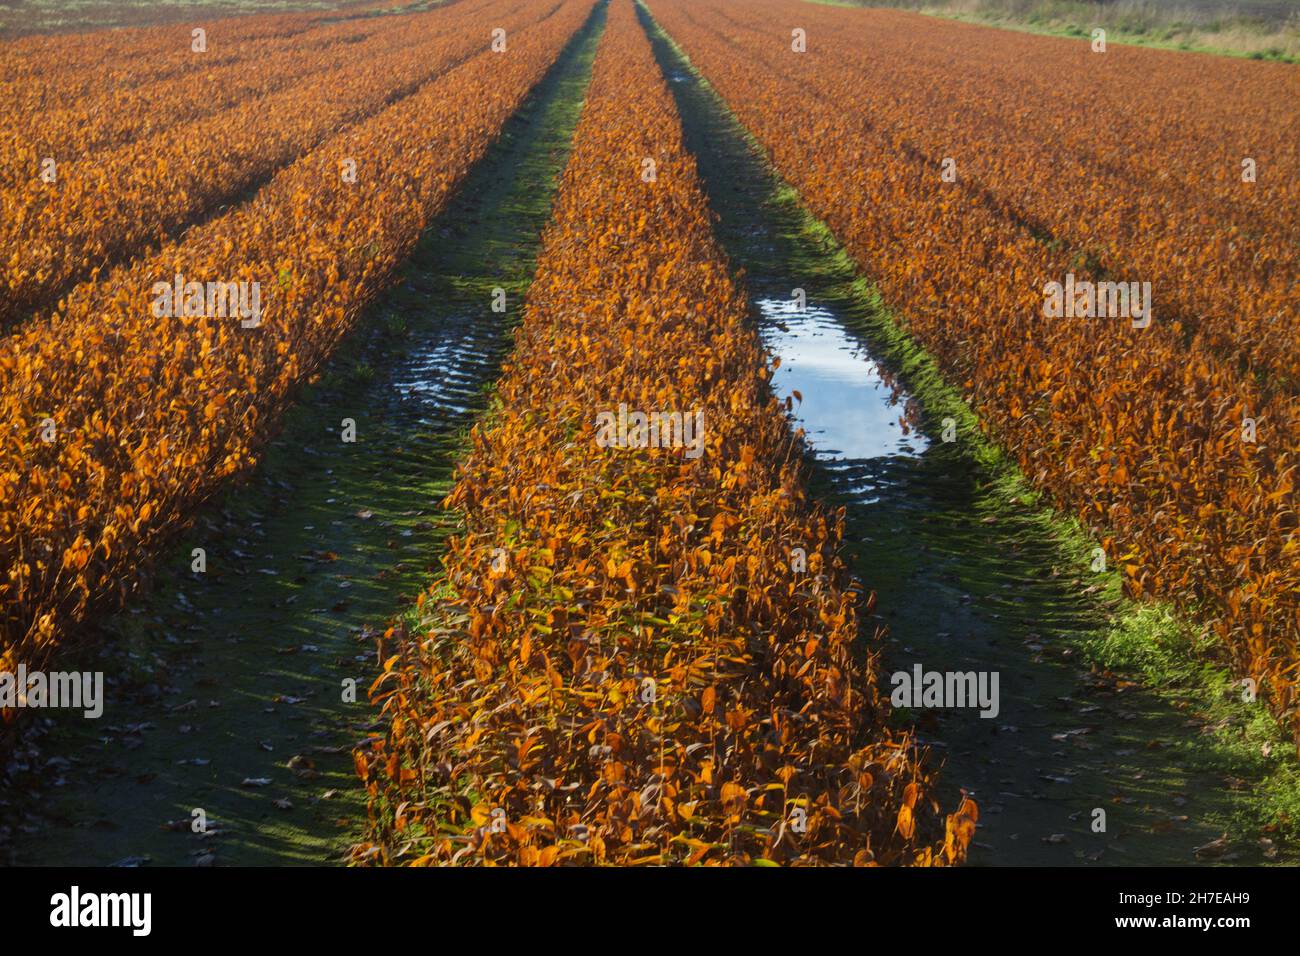 Agricultural field with brown withered Lilies in long rows Stock Photo